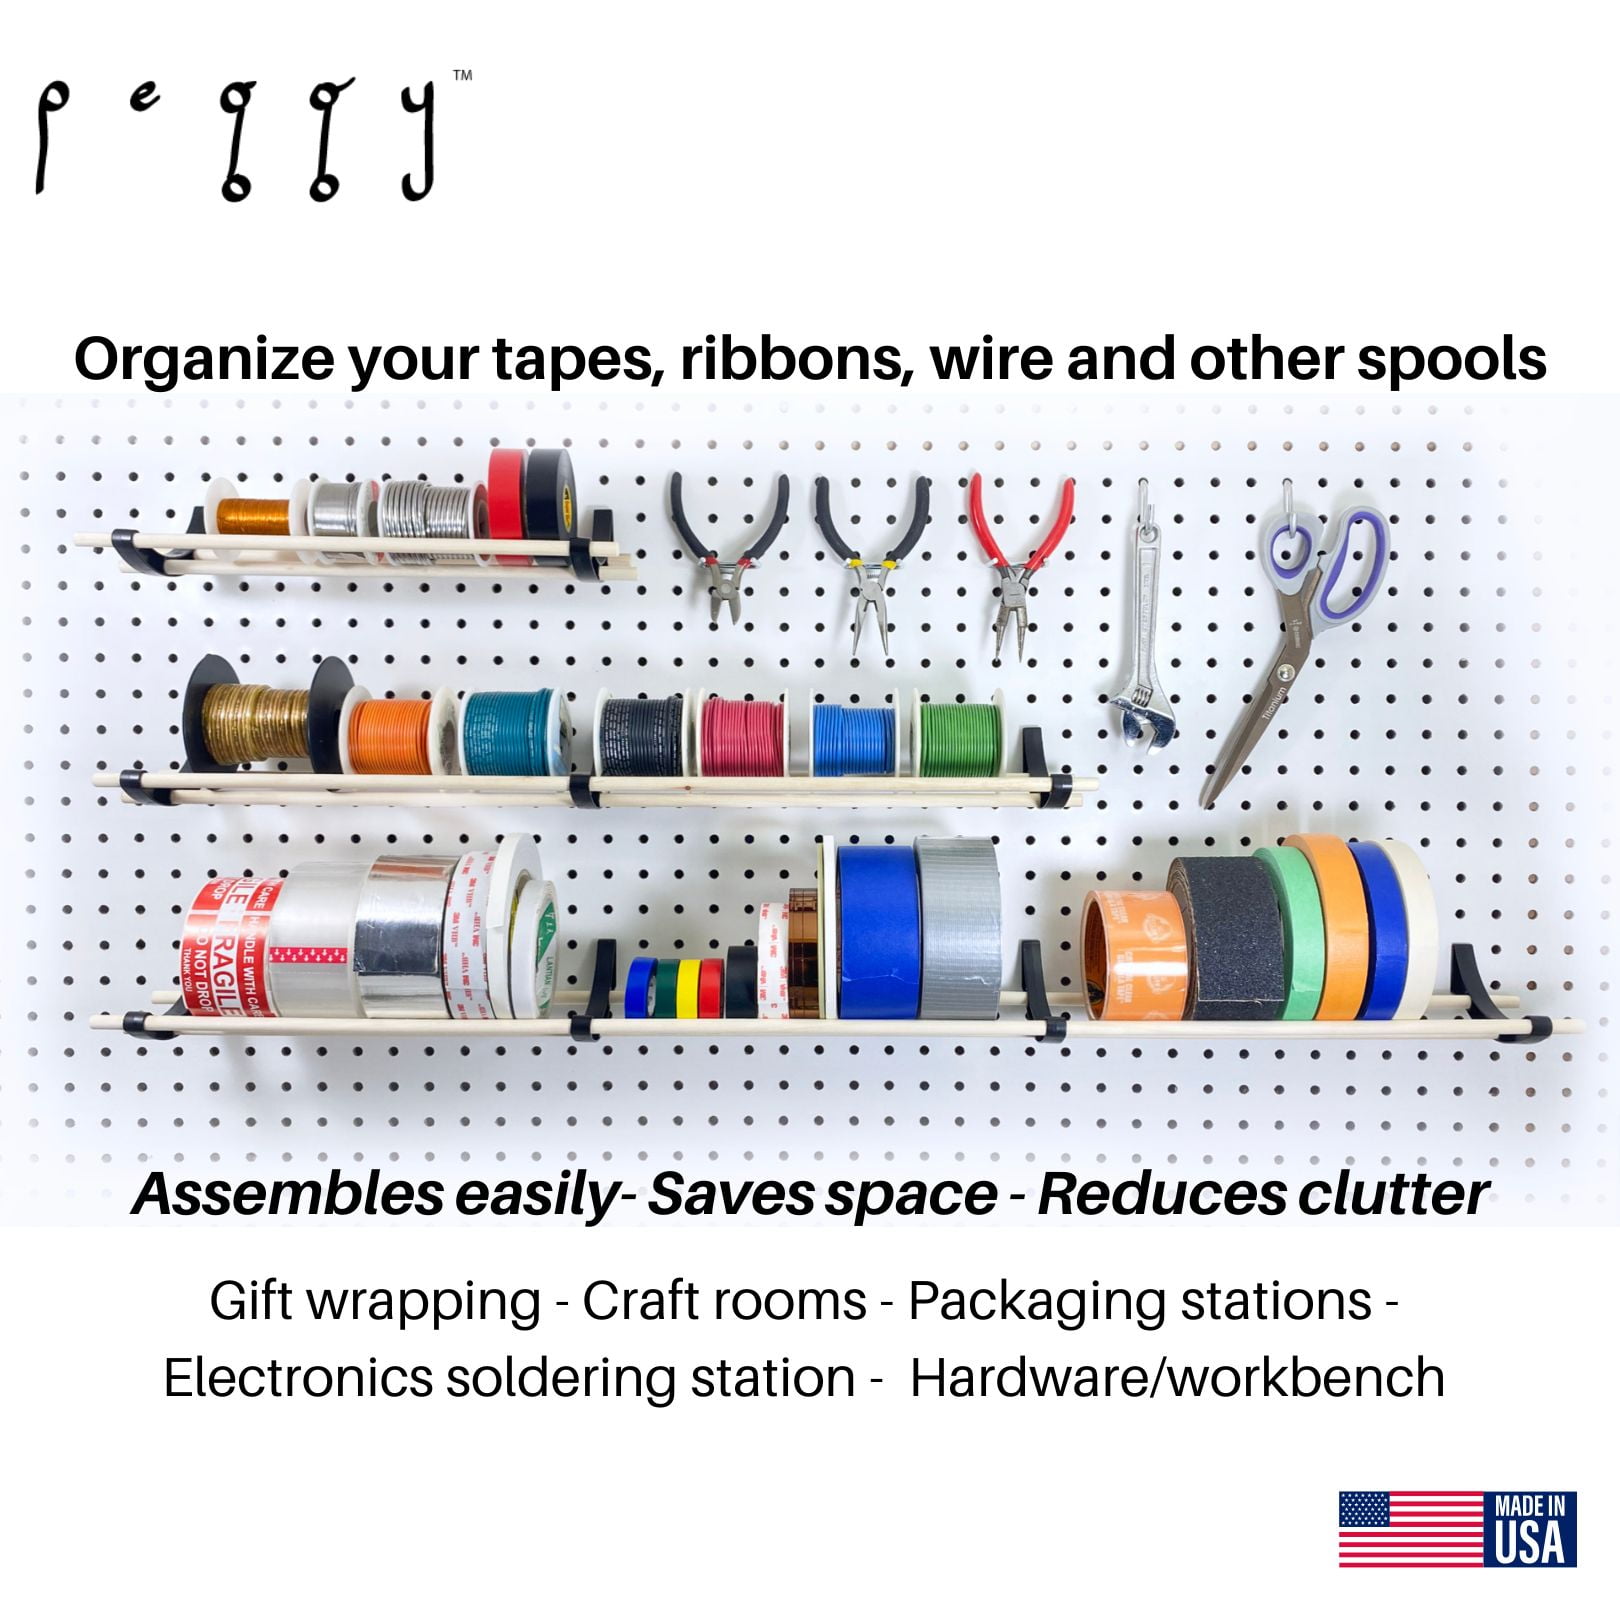 2 Metal Ribbon Racks.for Use on Pegboard to Easily Hold and